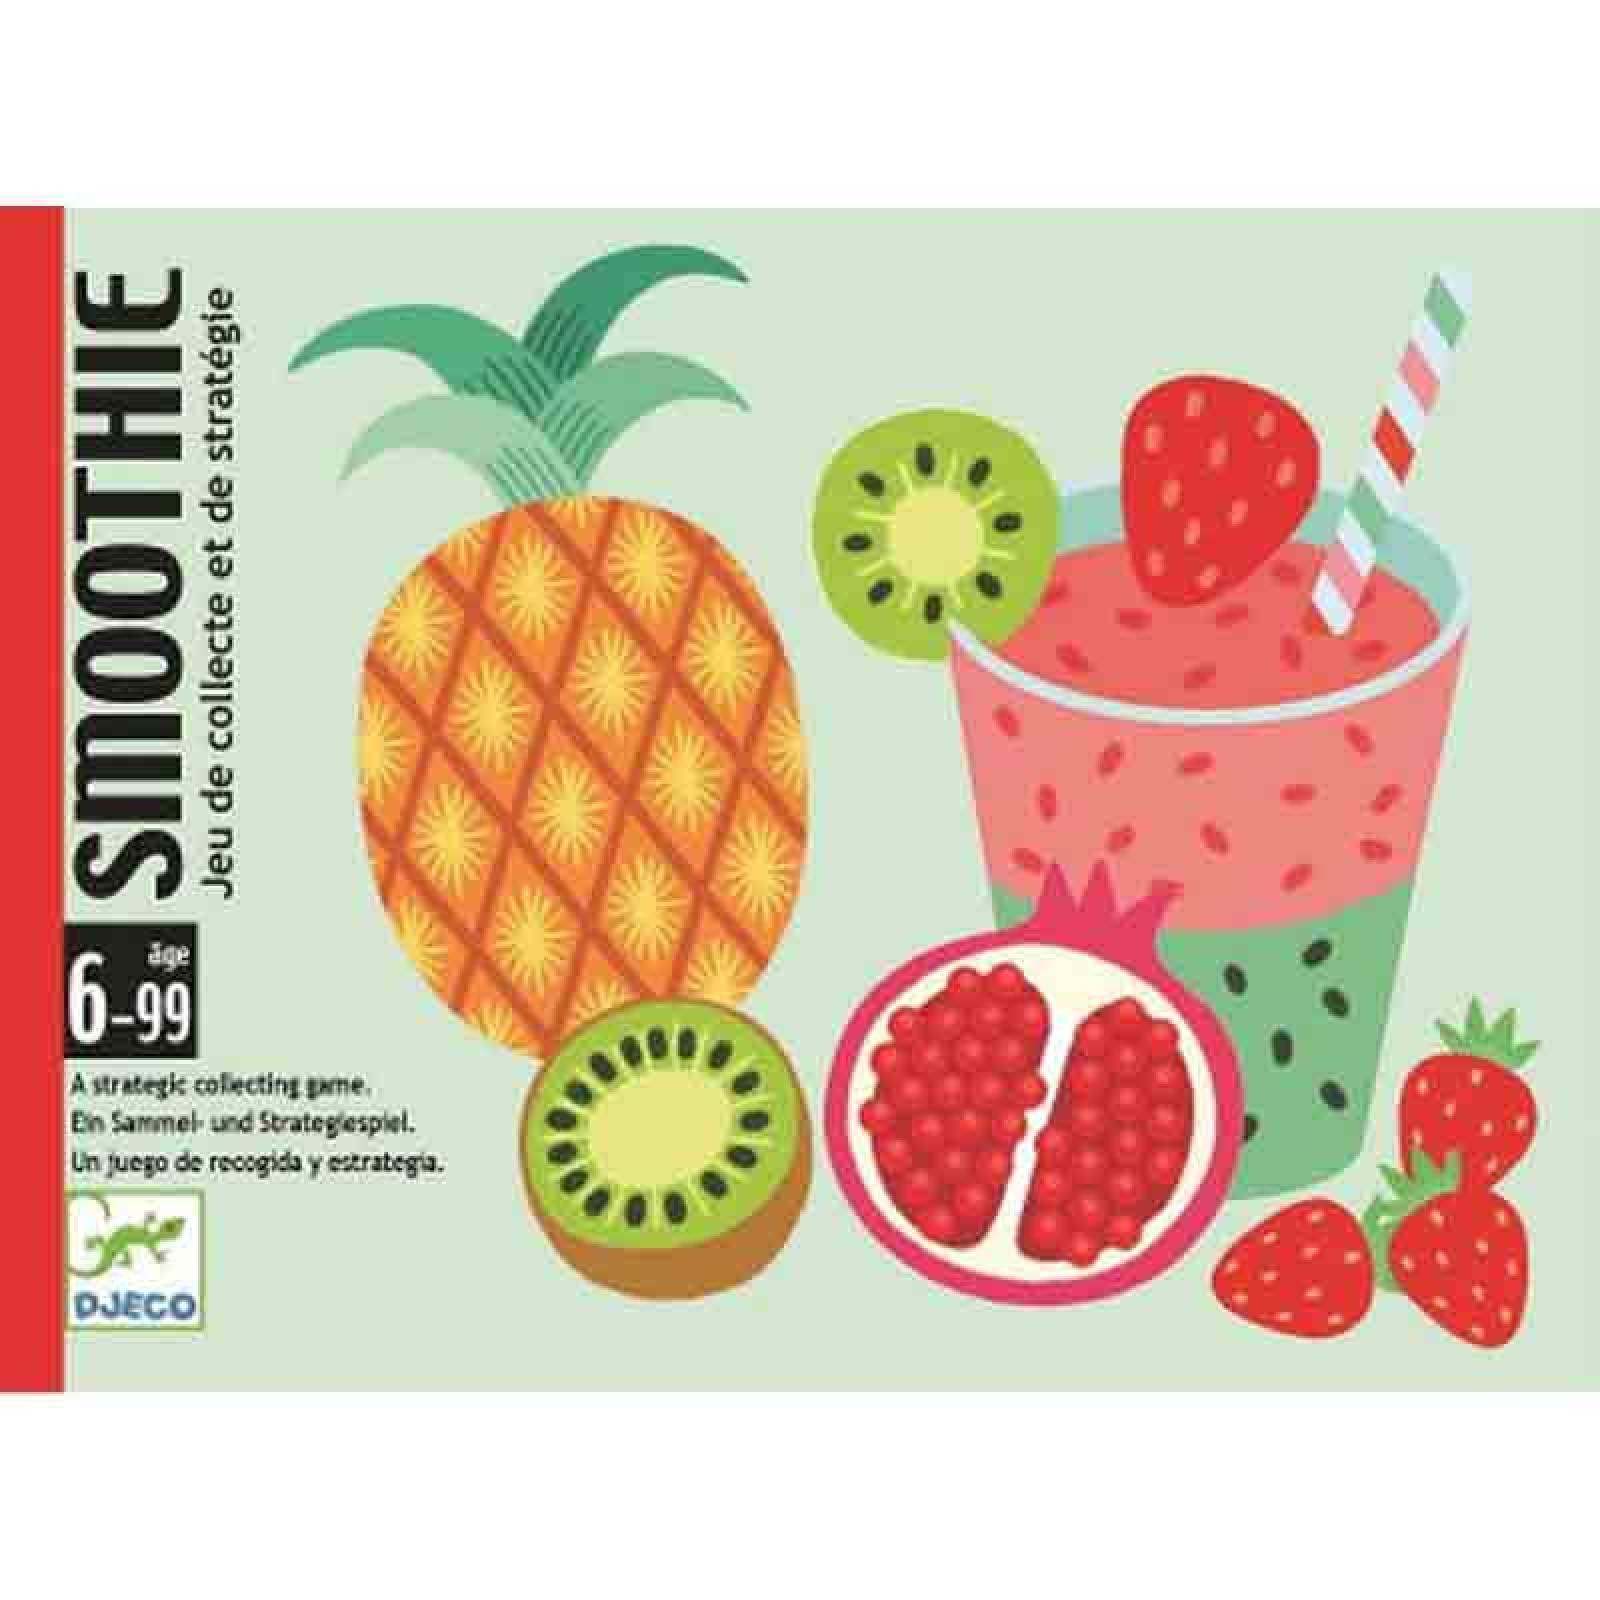 Smoothie Card Game By Djeco 6-99yrs